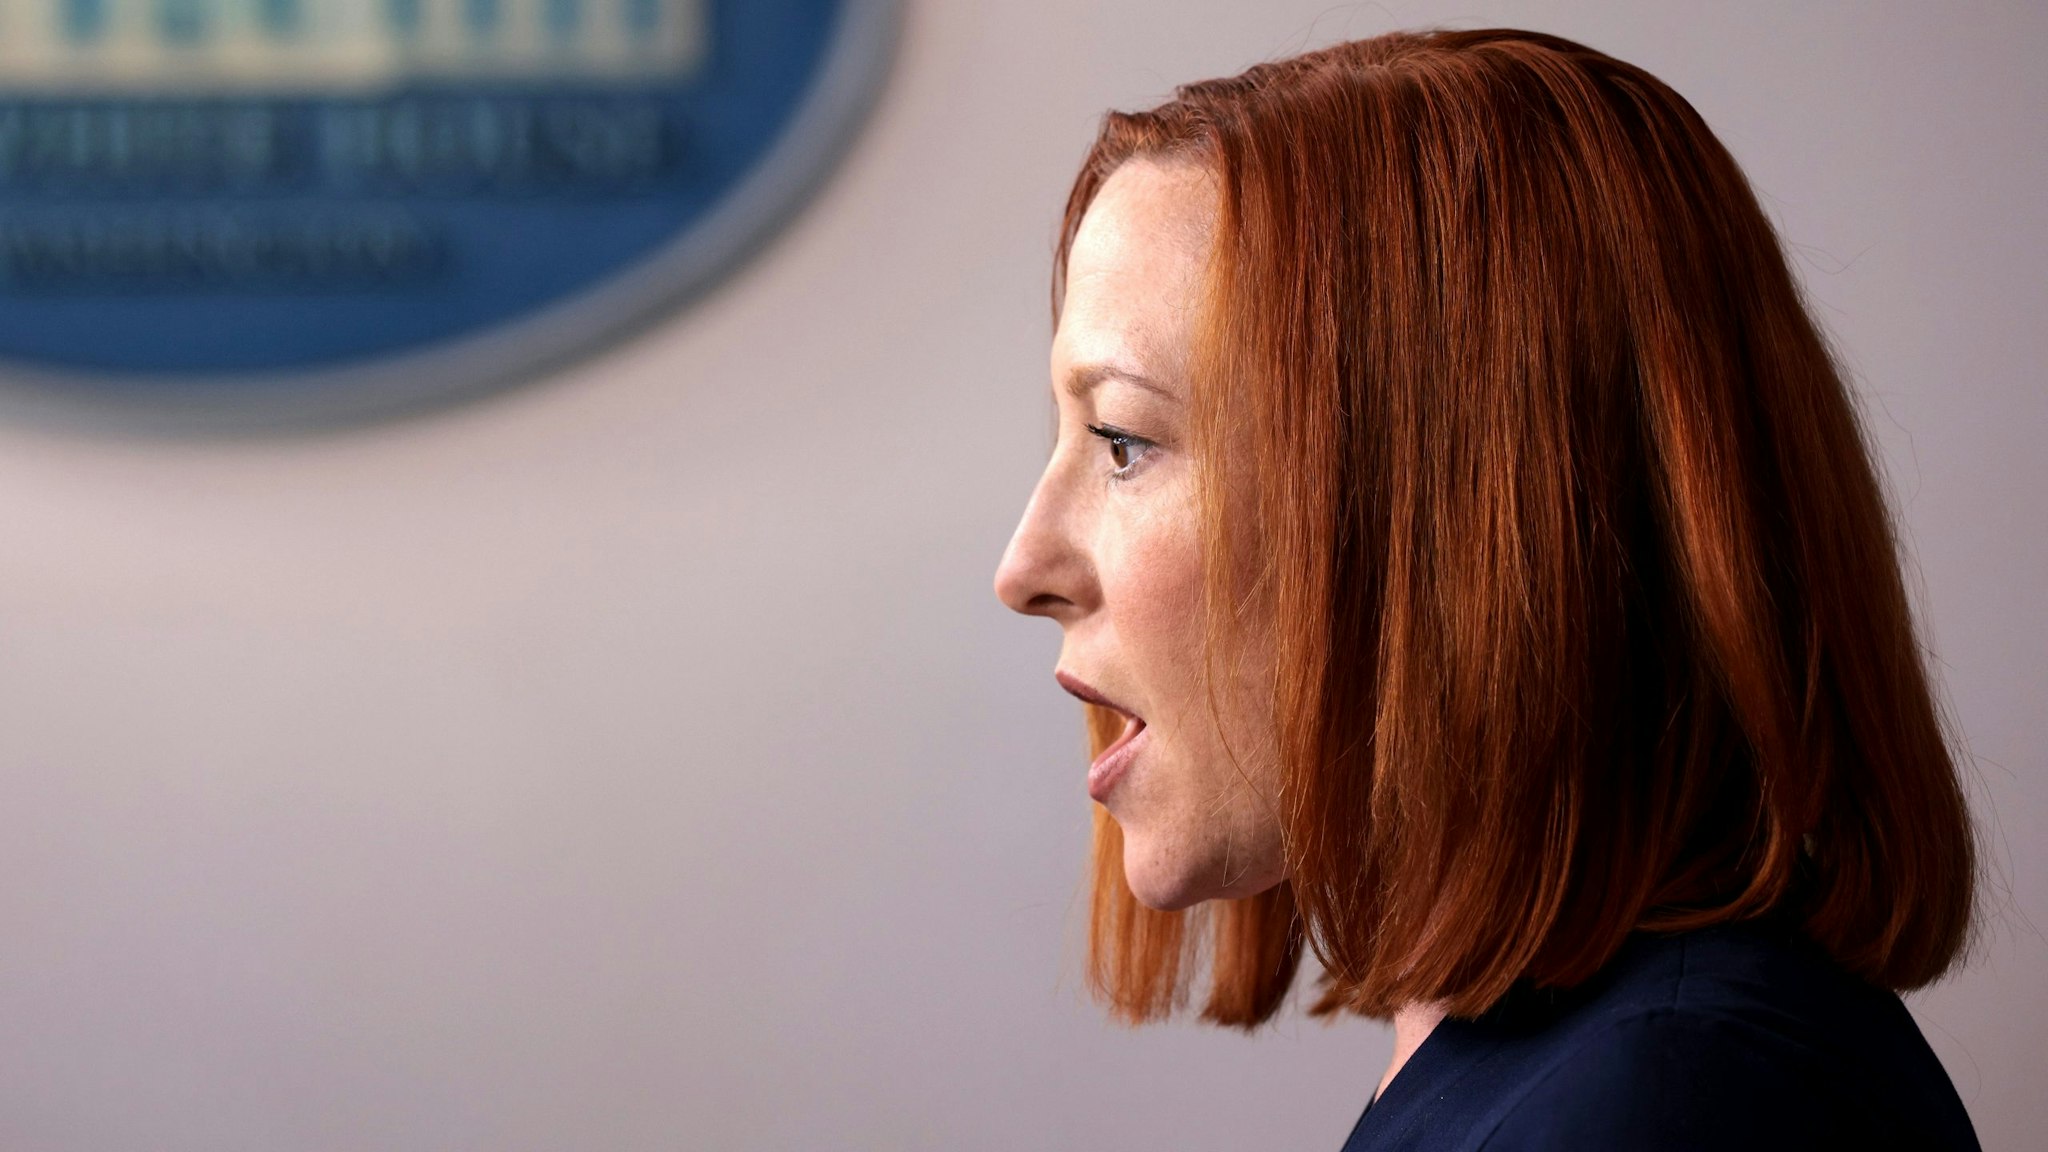 WASHINGTON, DC - APRIL 05: White House Press Secretary Jen Psaki speaks during a daily press briefing at the James Brady Press Briefing Room of the White House on April 05, 2021 in Washington, DC. Psaki answered a range of questions related to the day's news.